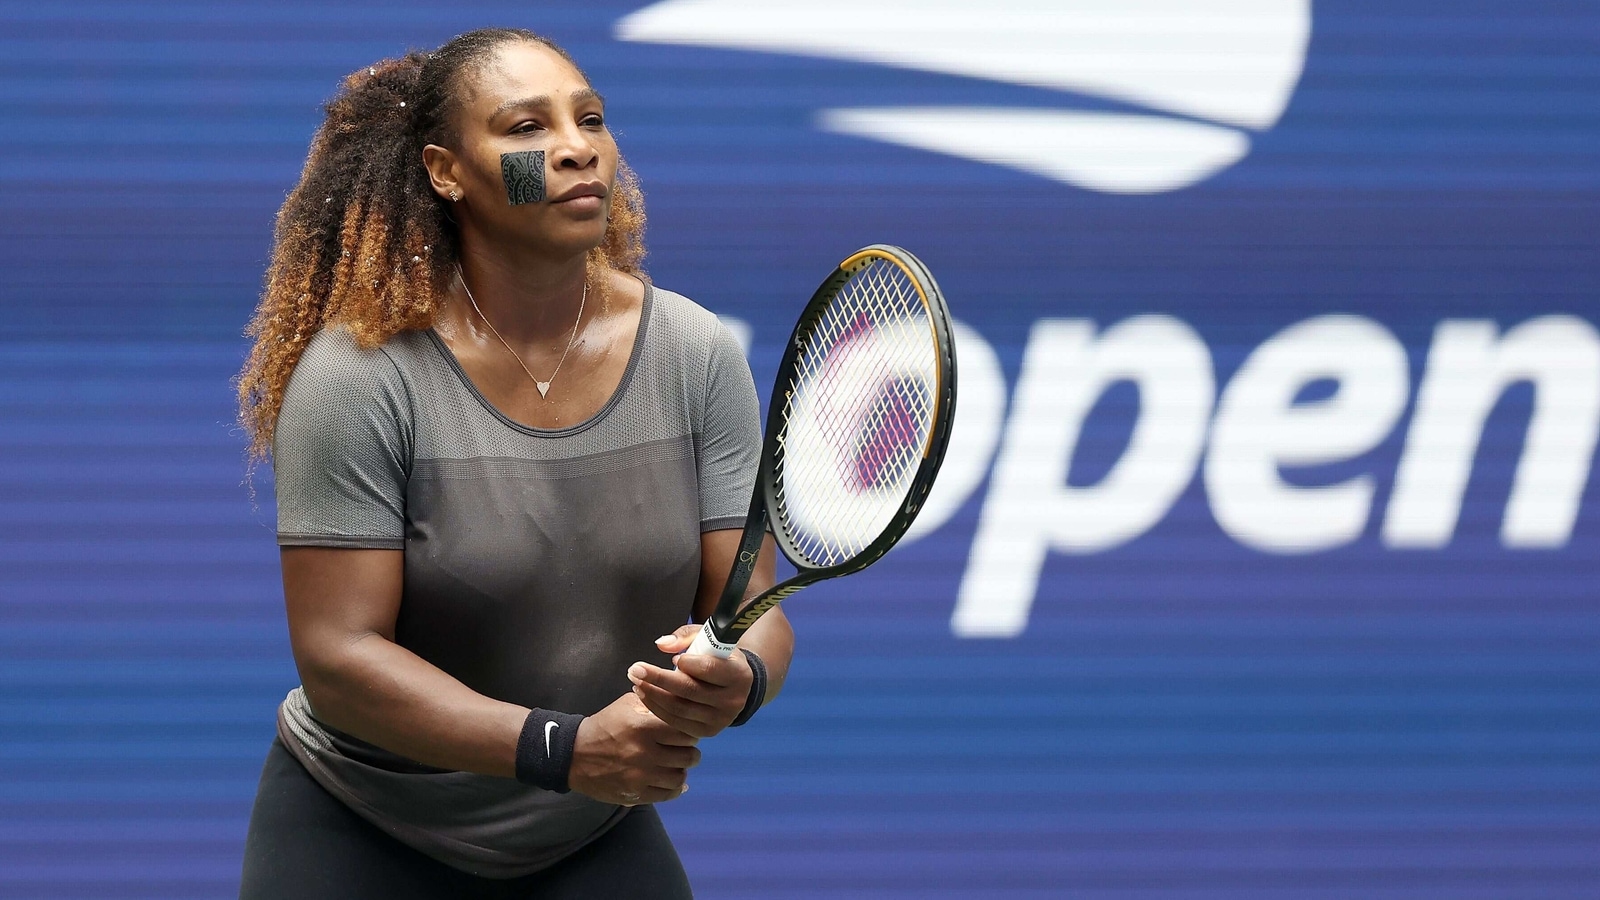 Serena Williams US Open run inspiring people of all ages Tennis News